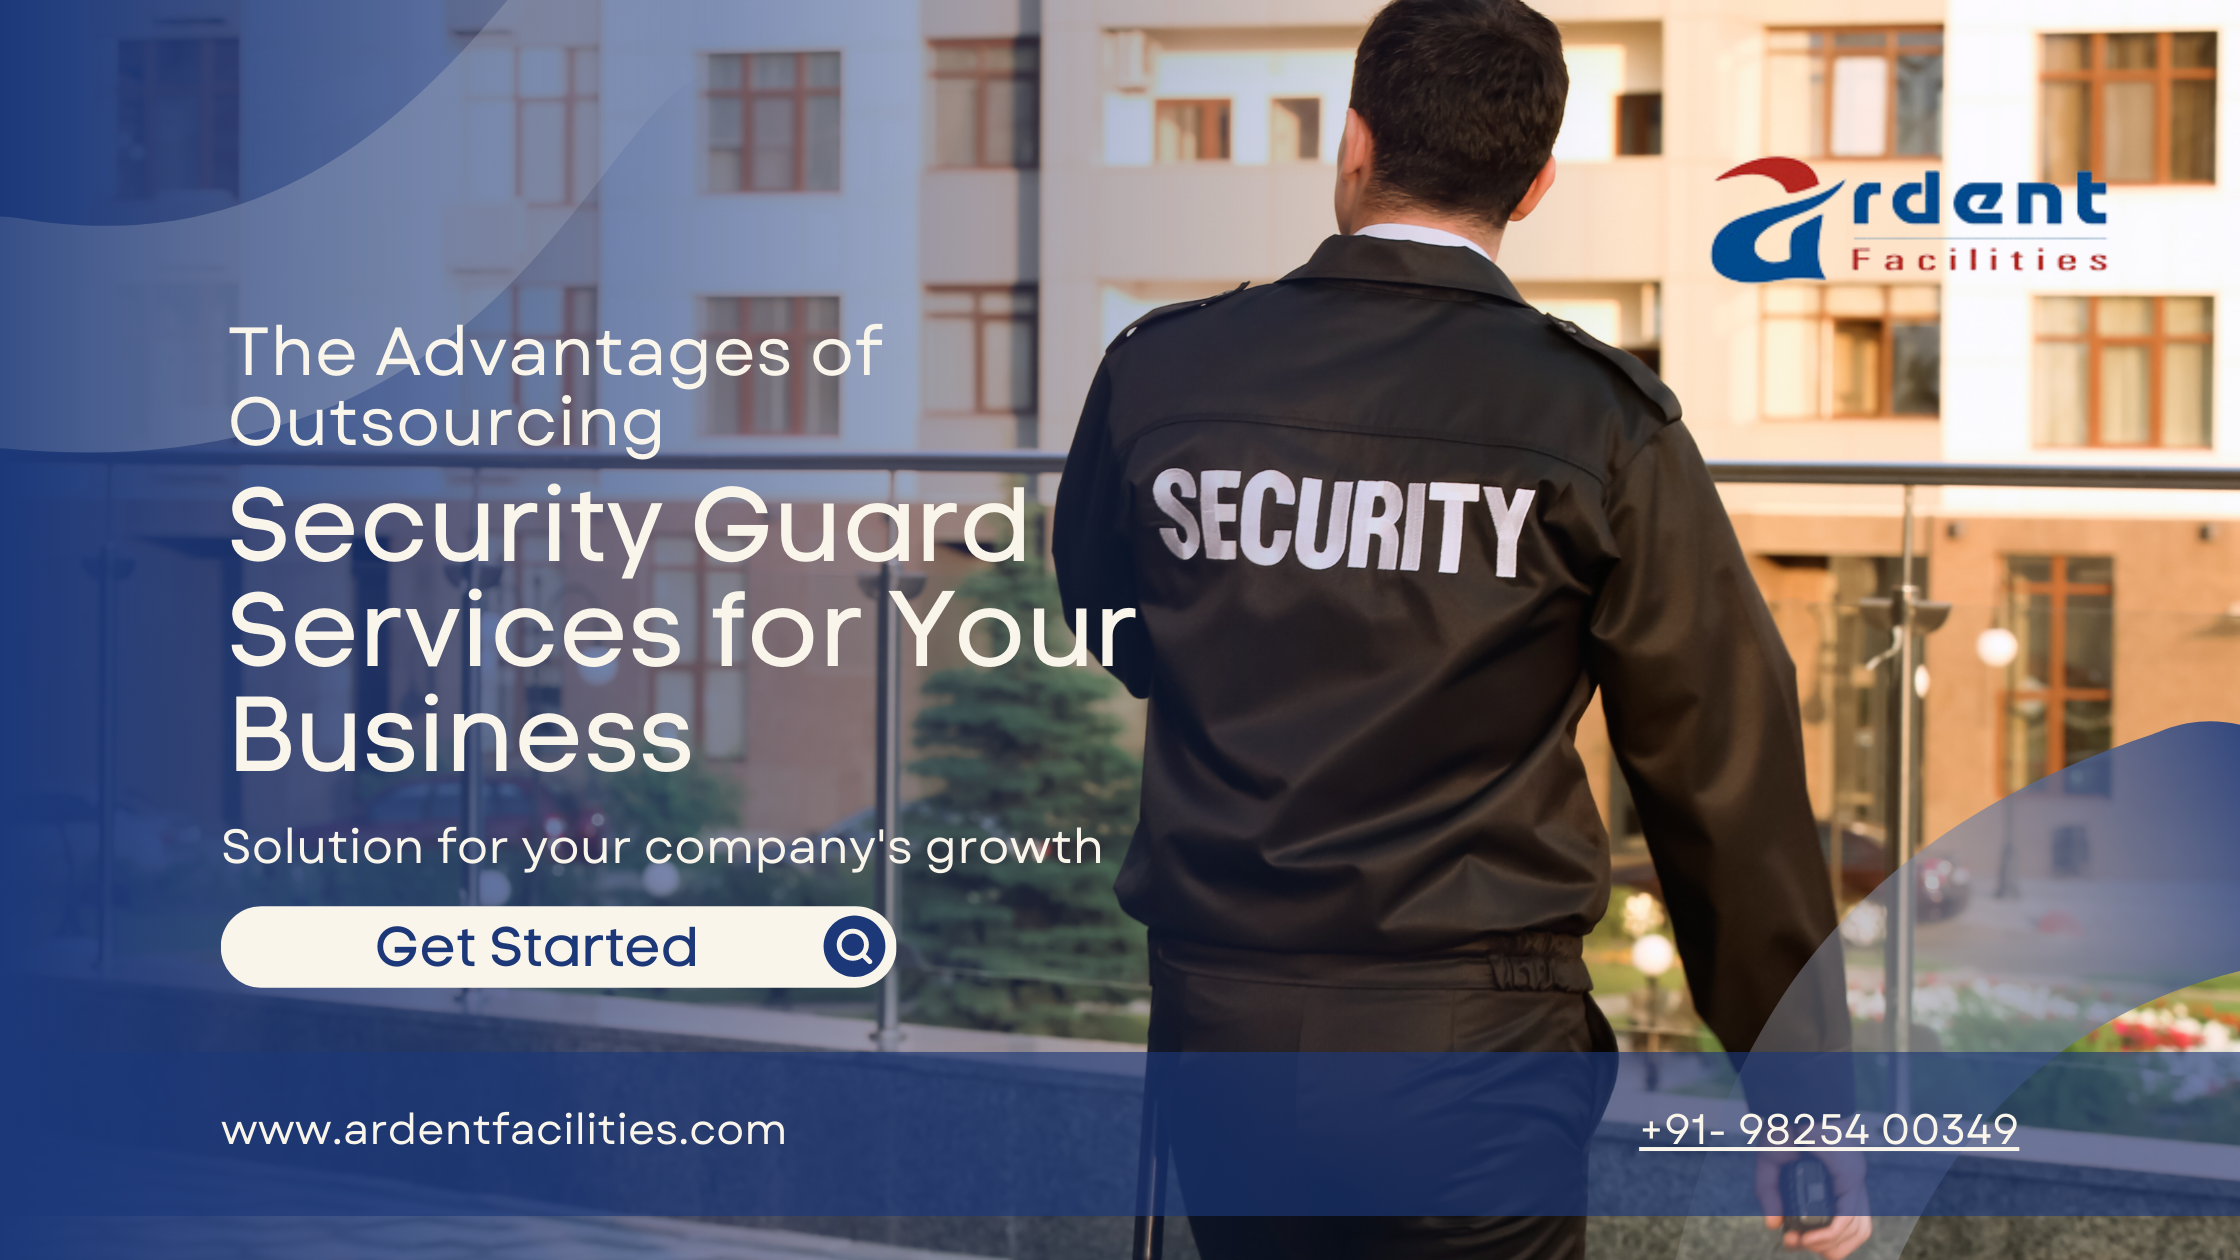 Security Guard Services - Ardent Facilities